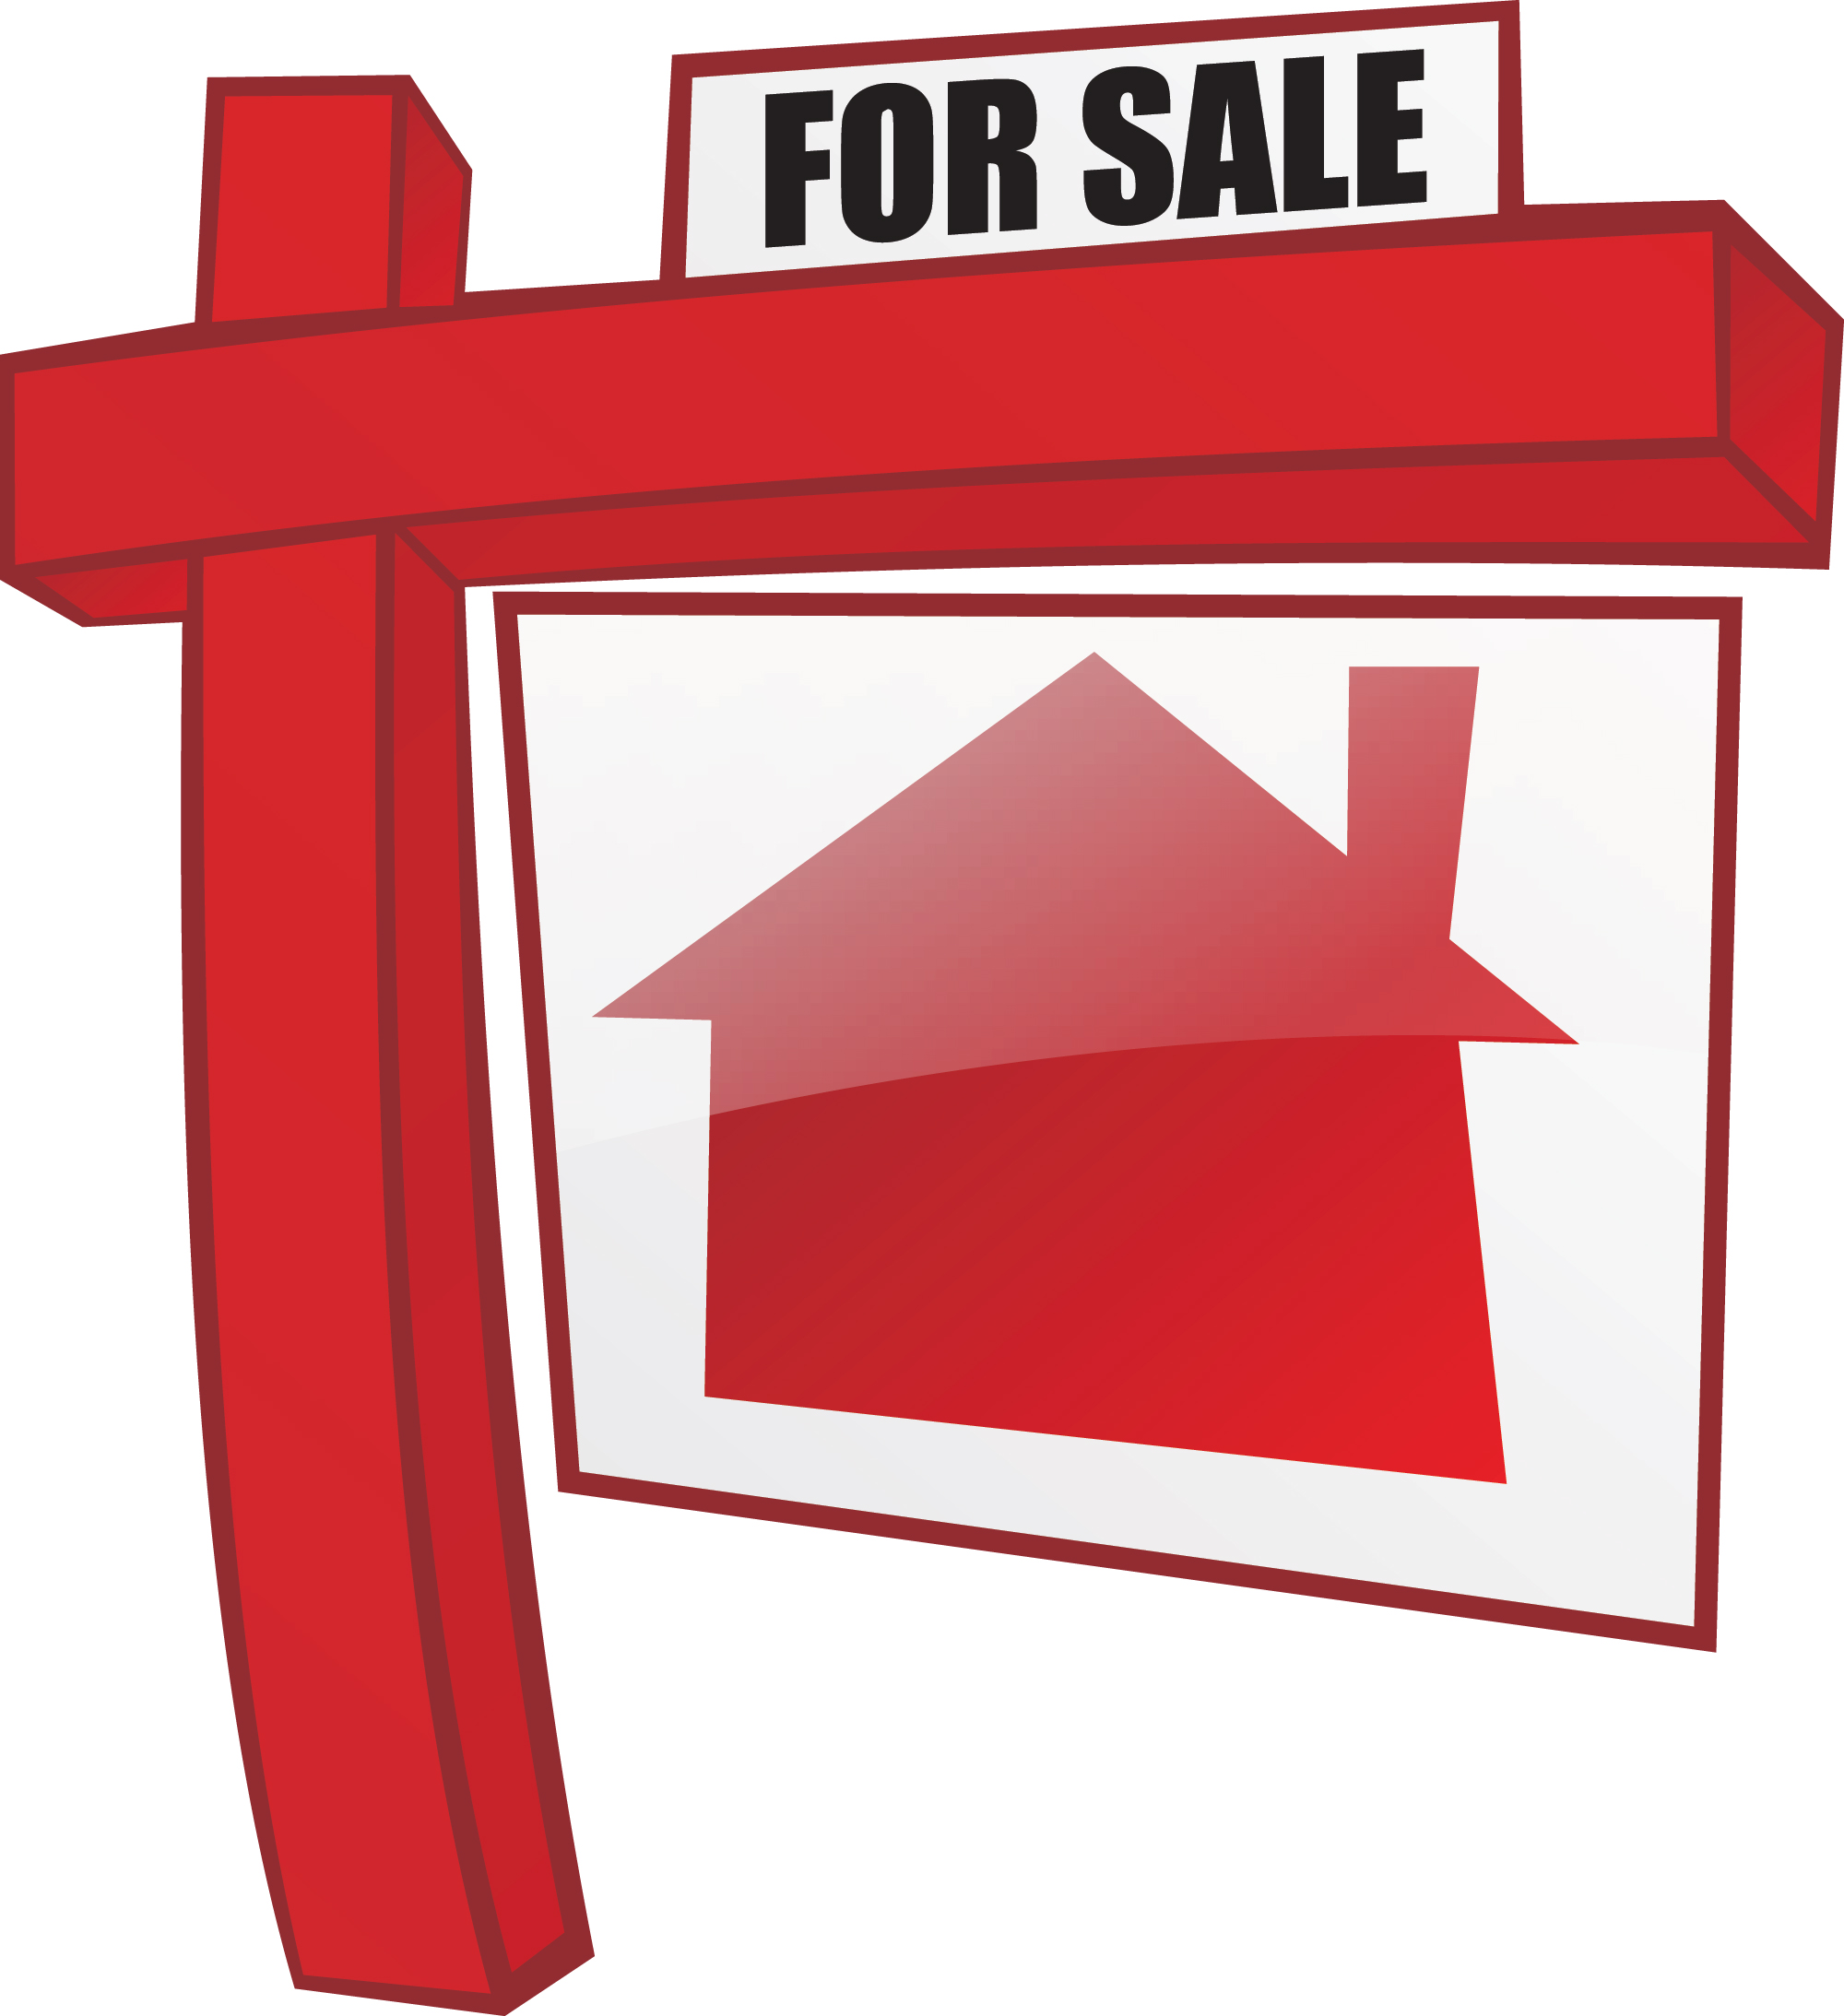 Free clipart images for real estate